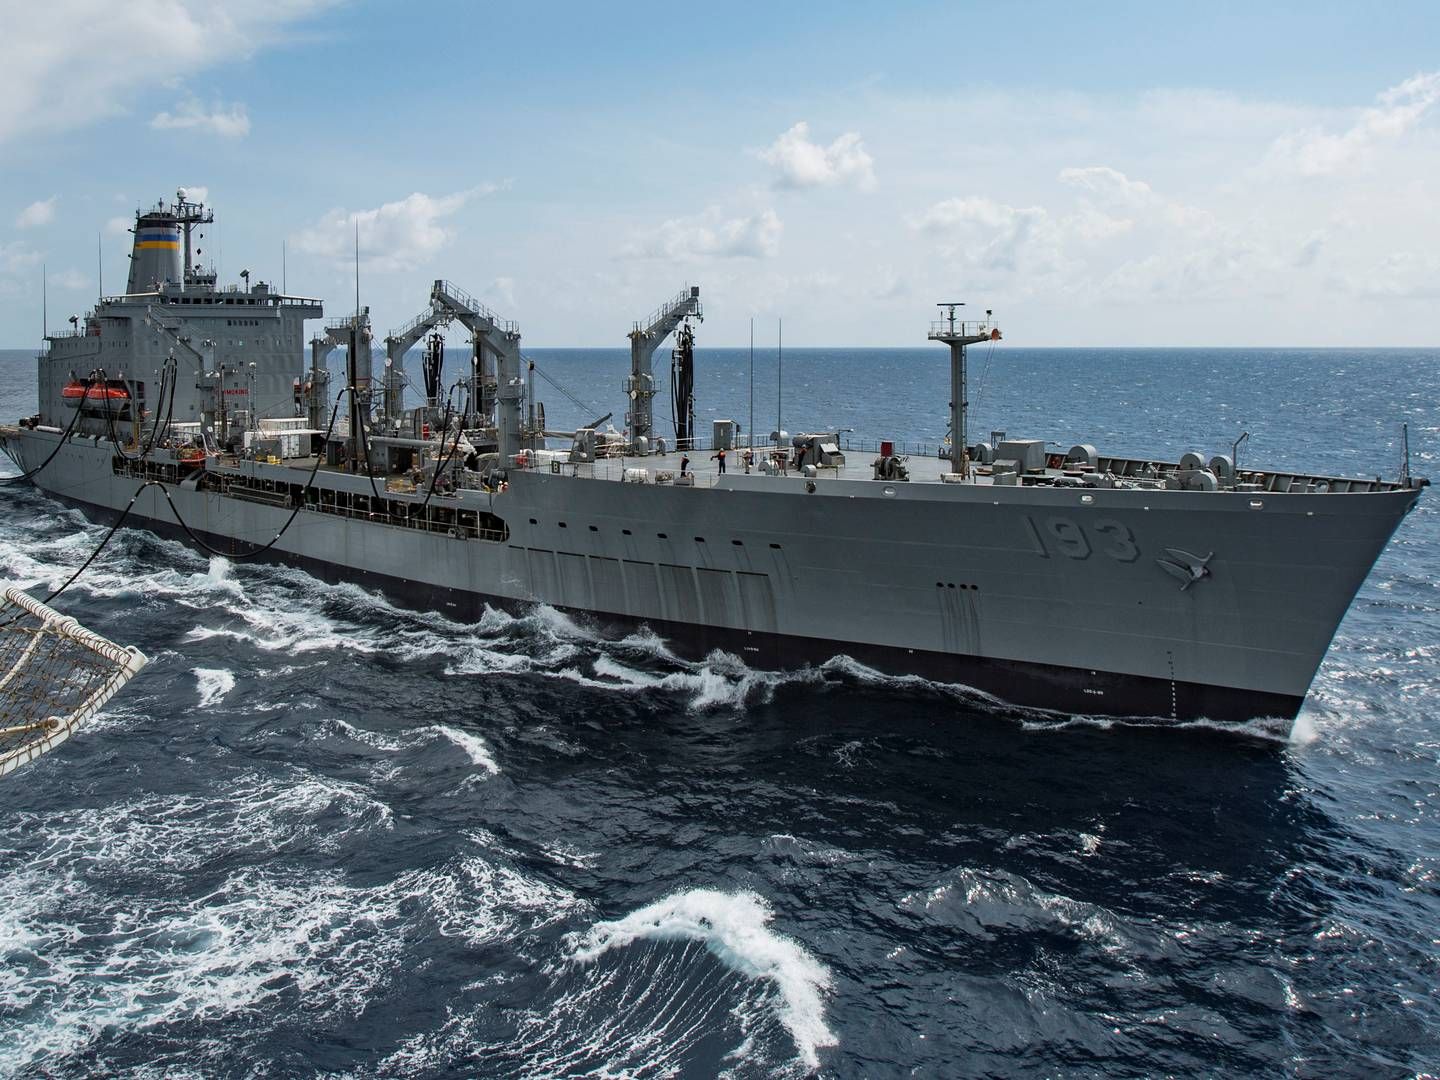 The Military Sealift Command ship USNS Walter S. Diehl, which has nothing to do with the current lawsuit, sails with supplies in the South China Sea.